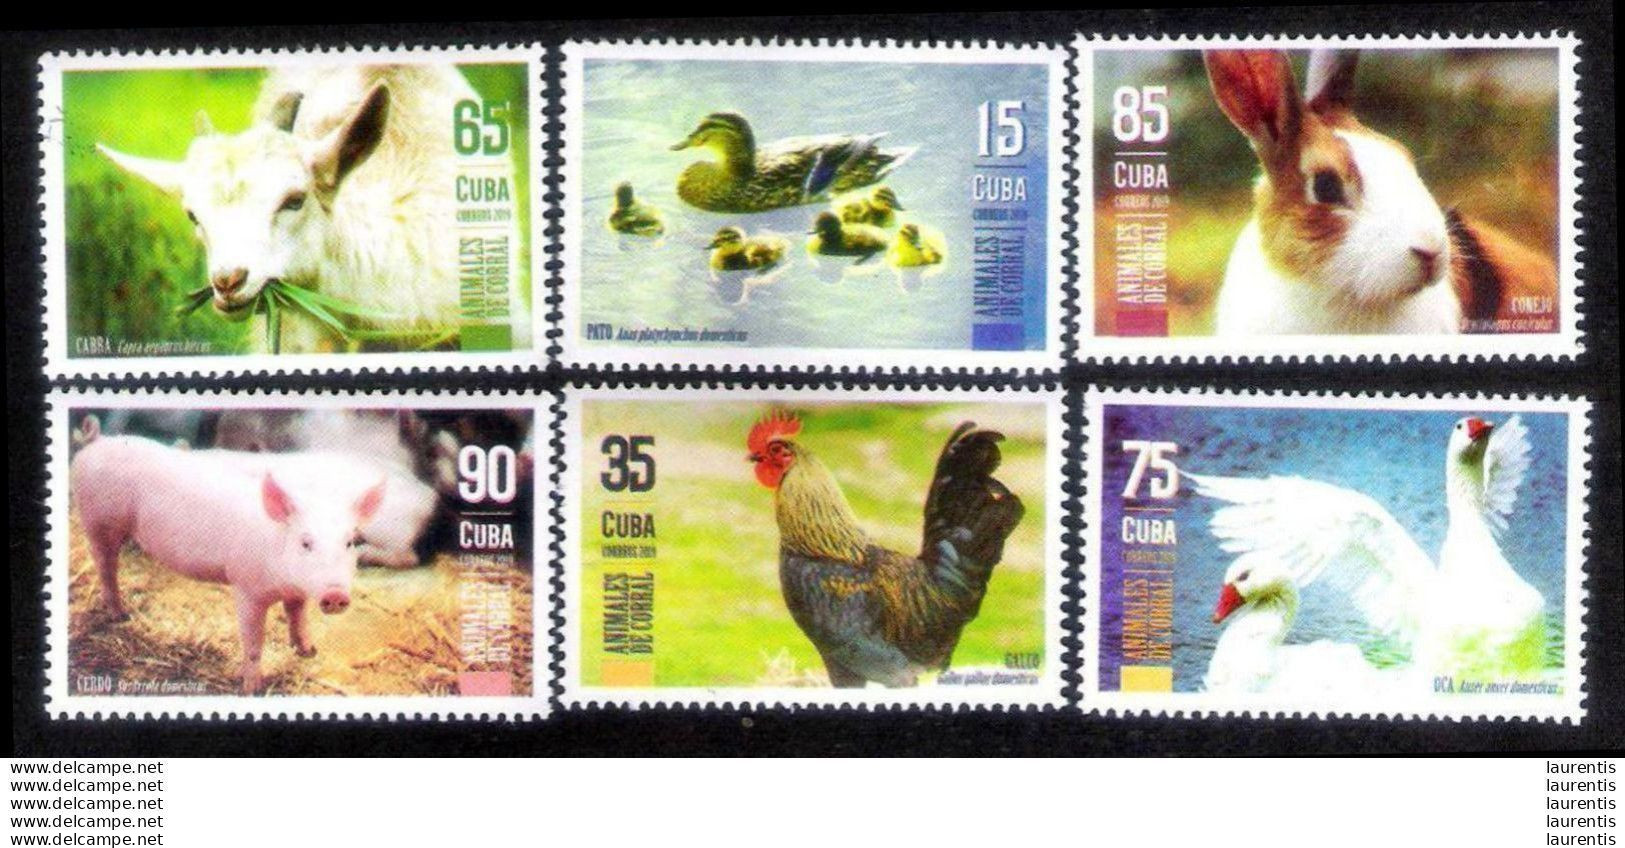 D2859  Ducks-Pigs-Roosters-Rabbits-Geese-Goats-Cows - 2019 - MNH - Cb - 2,85 - Fattoria